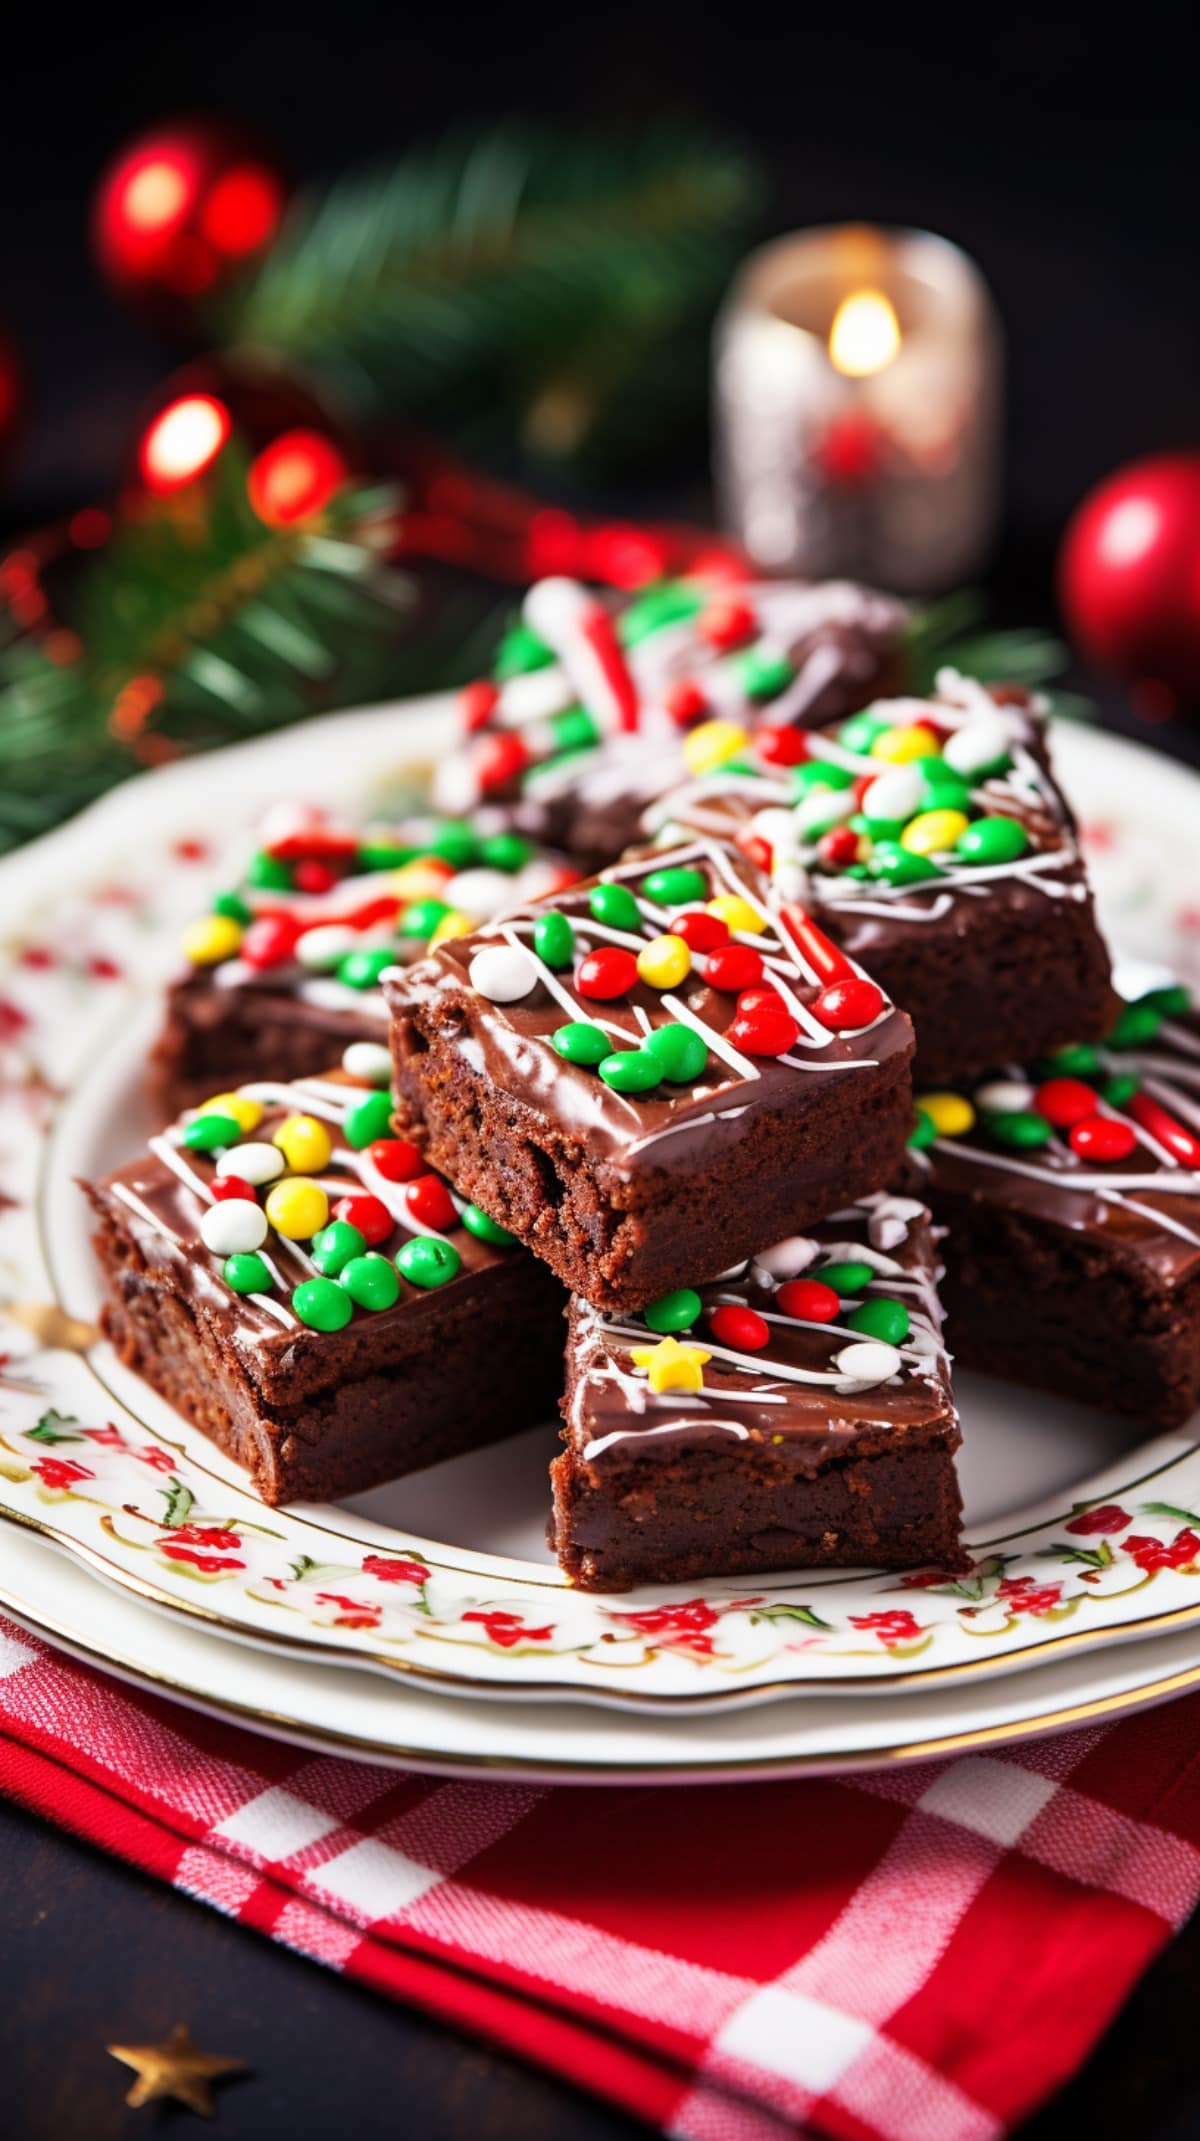 A pile of chocolate brownies topped with M&M candies and drizzled with white chocolate syrup served on a holiday table.